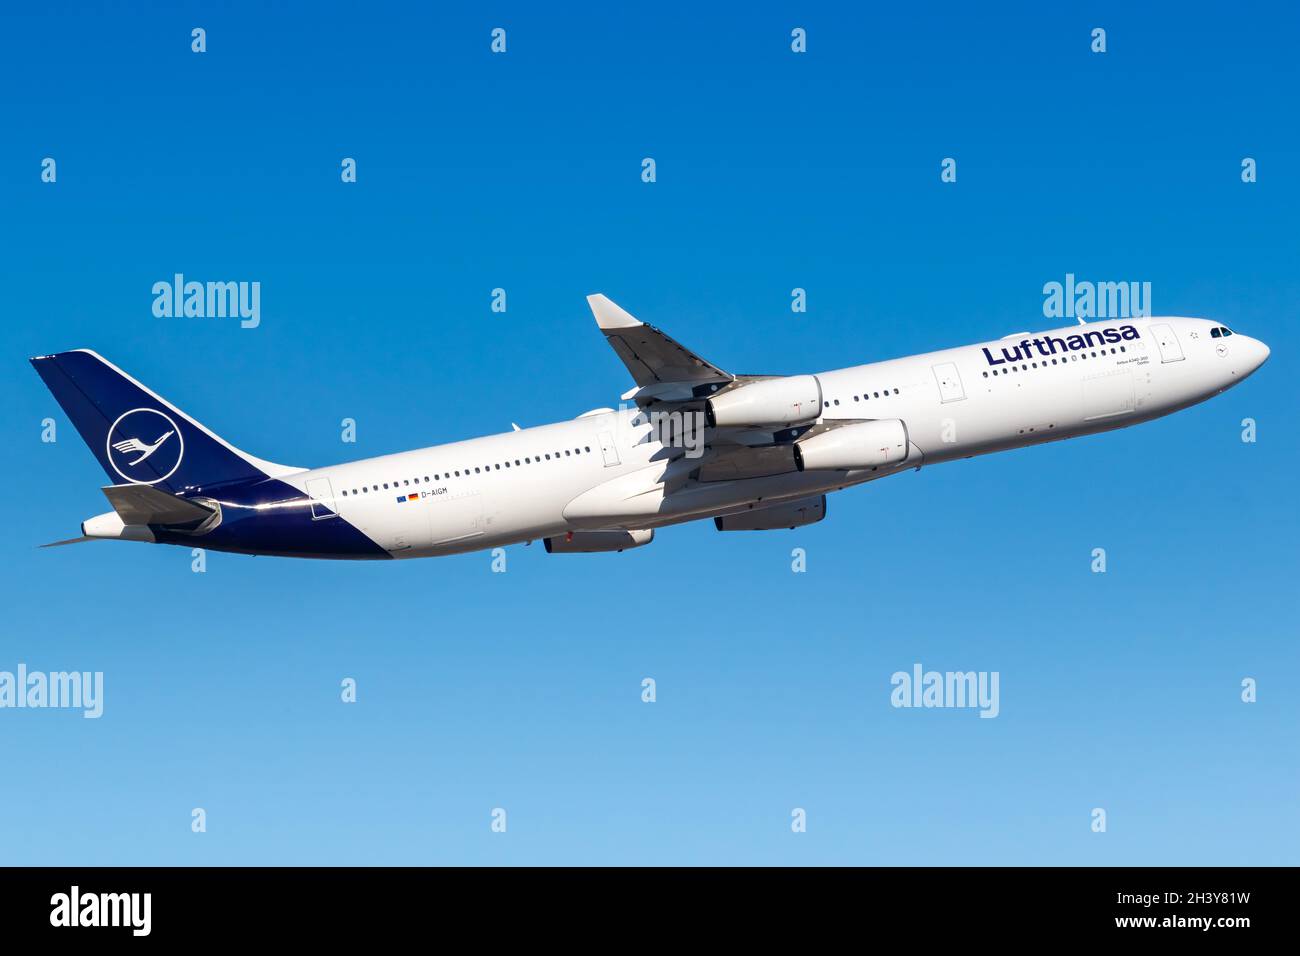 Lufthansa Airbus A340-300 Aircraft Frankfurt Airport in Germany Stock Photo